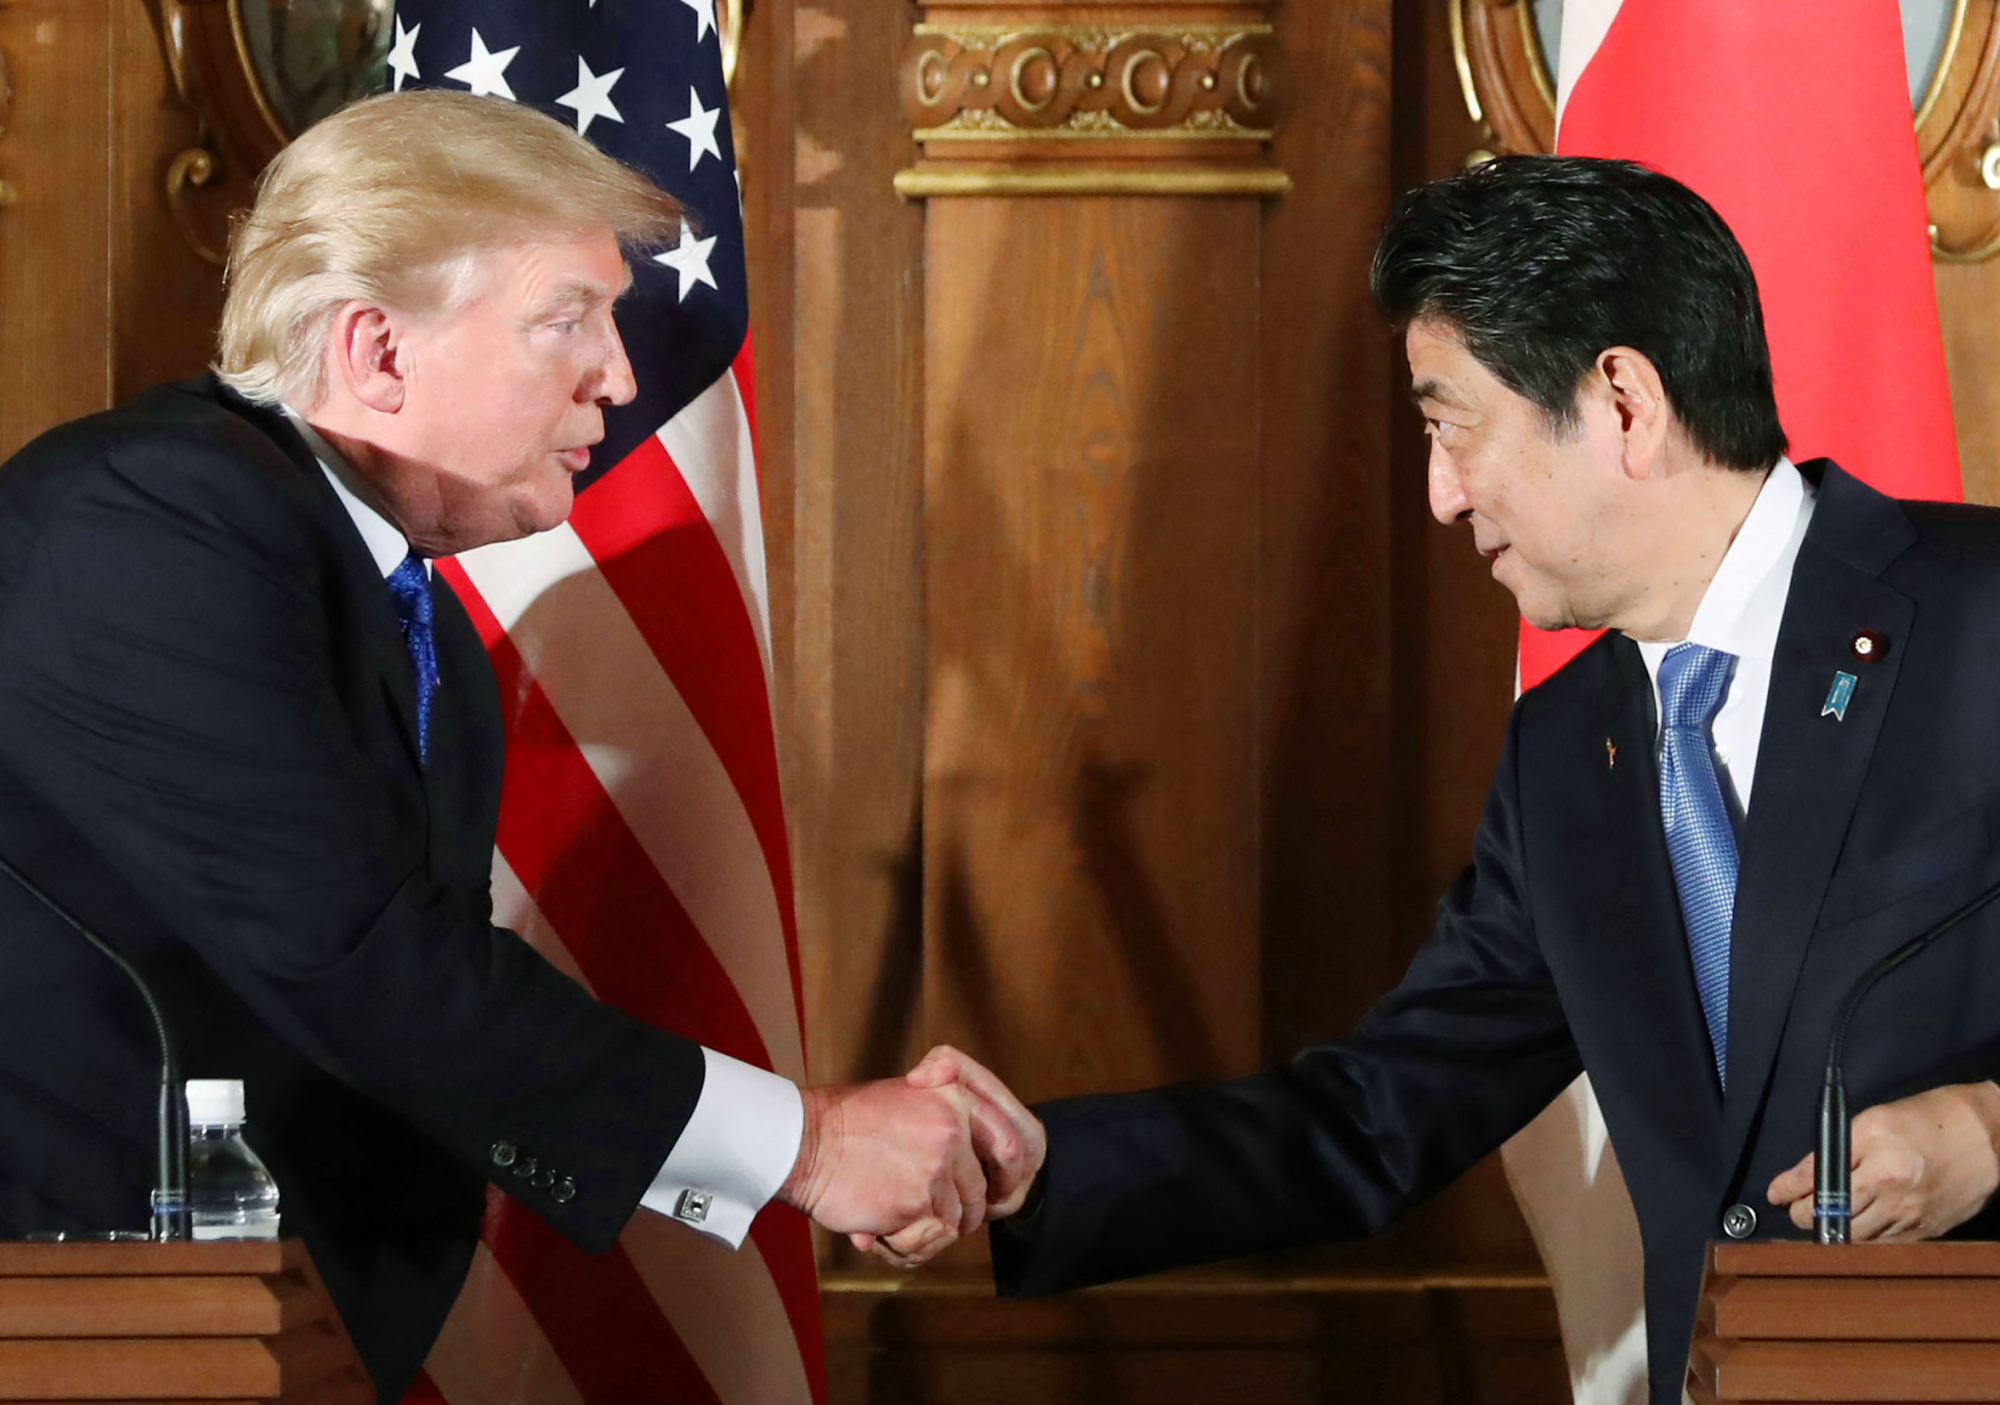 Different strokes: U.S. President Donald Trump and Prime Minister Shinzo Abe shake hands after a press conference in Tokyo on Nov. 6. During his visit Trump said Japan should be buying more military hardware from the U.S., but the nation has its own plans. | POOL / KYODO